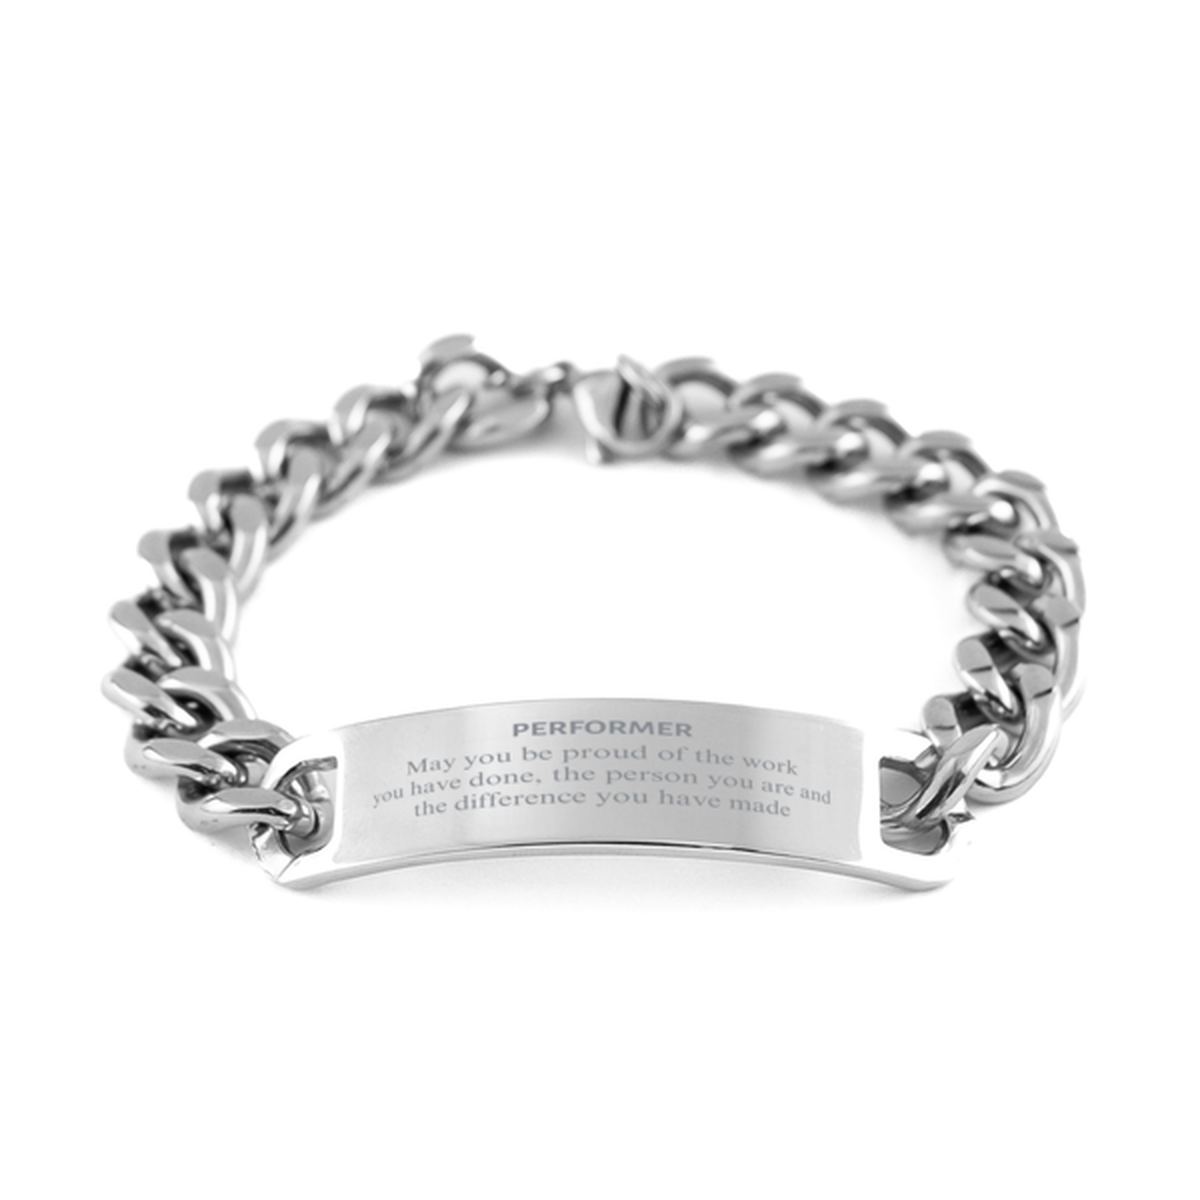 Performer May you be proud of the work you have done, Retirement Performer Cuban Chain Stainless Steel Bracelet for Colleague Appreciation Gifts Amazing for Performer